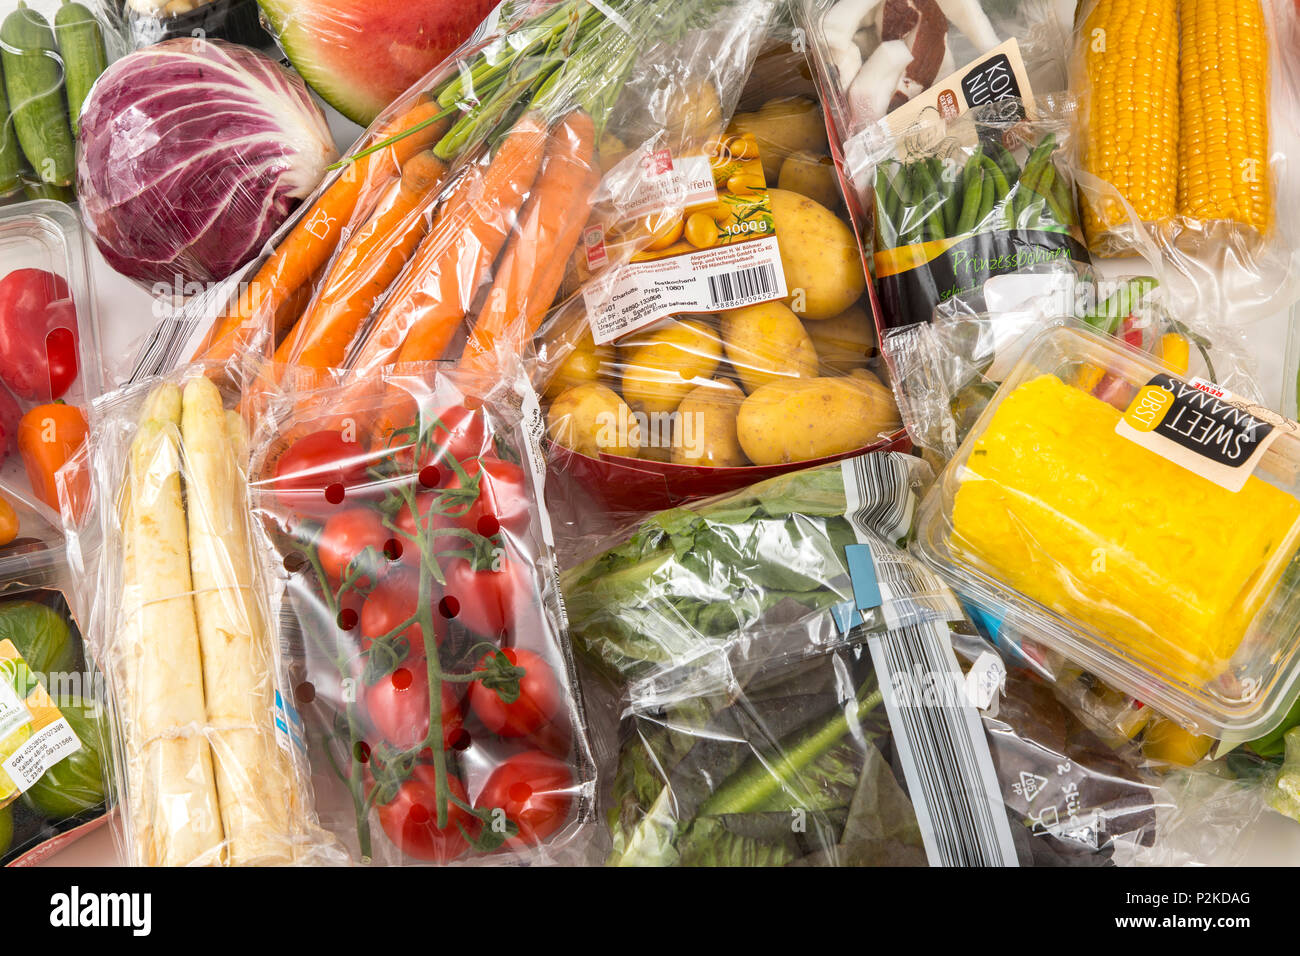 https://c8.alamy.com/comp/P2KDAG/fresh-food-vegetables-fruit-each-individually-packaged-in-plastic-wrap-all-food-is-available-in-the-same-supermarket-even-without-plastic-packagin-P2KDAG.jpg